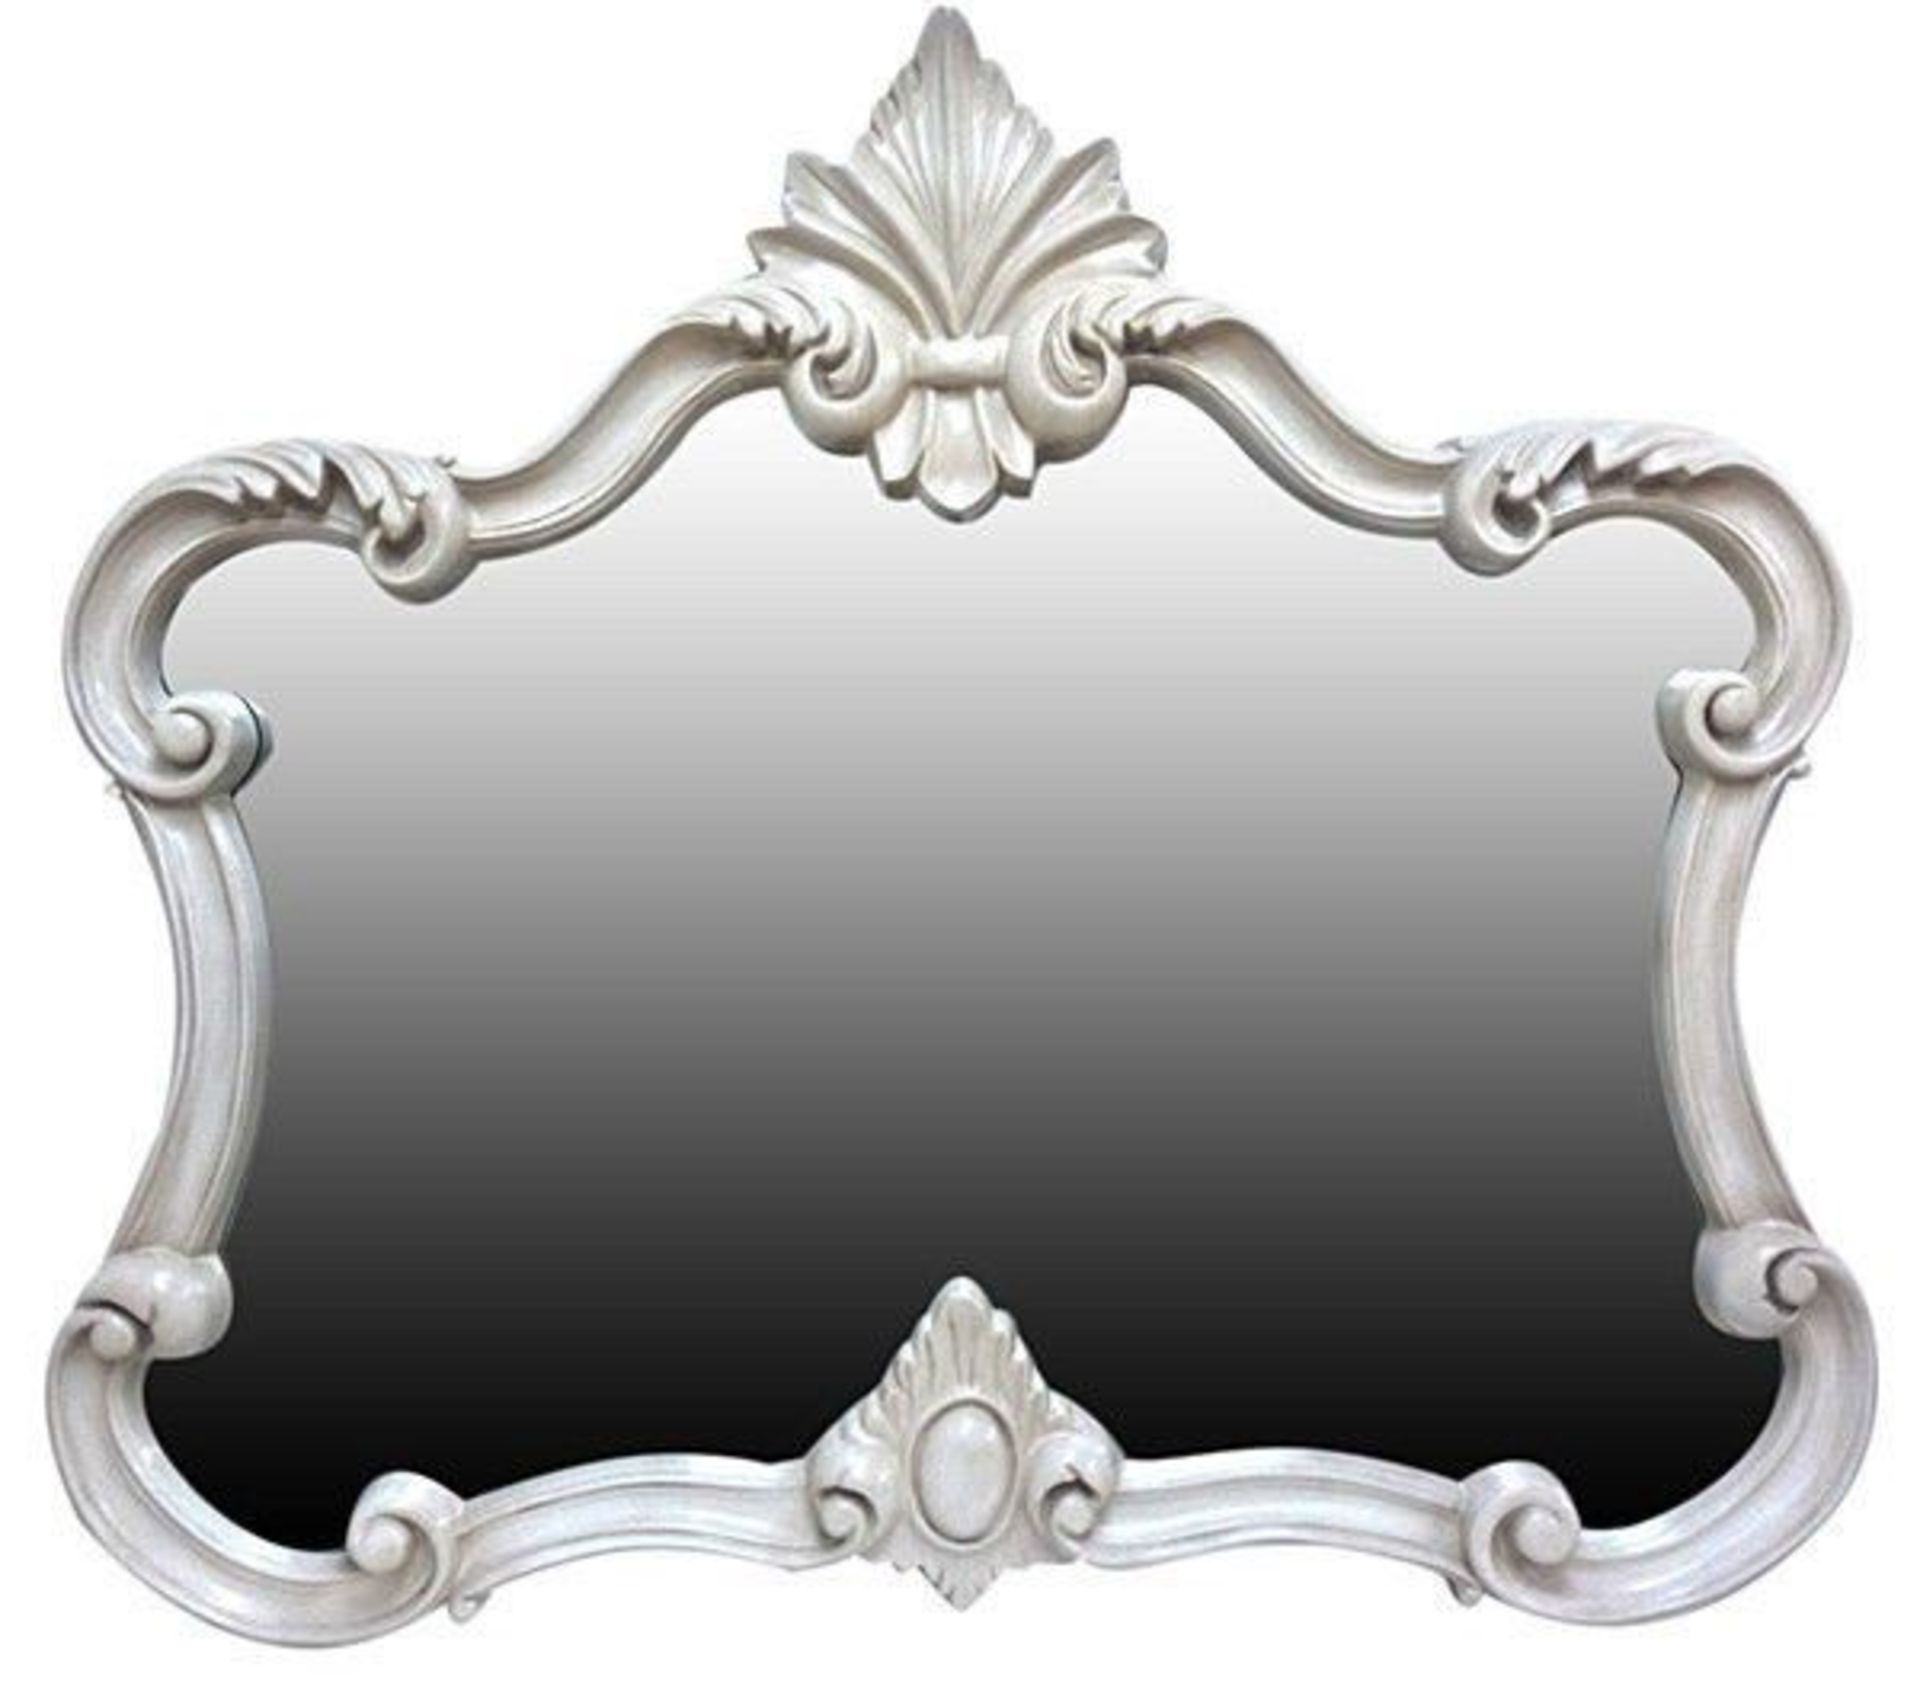 Brand New REDUCED TO CLEAR Stunning Large Overmantel Mirror Wall Hanging 101cm x 122cm    Brand New